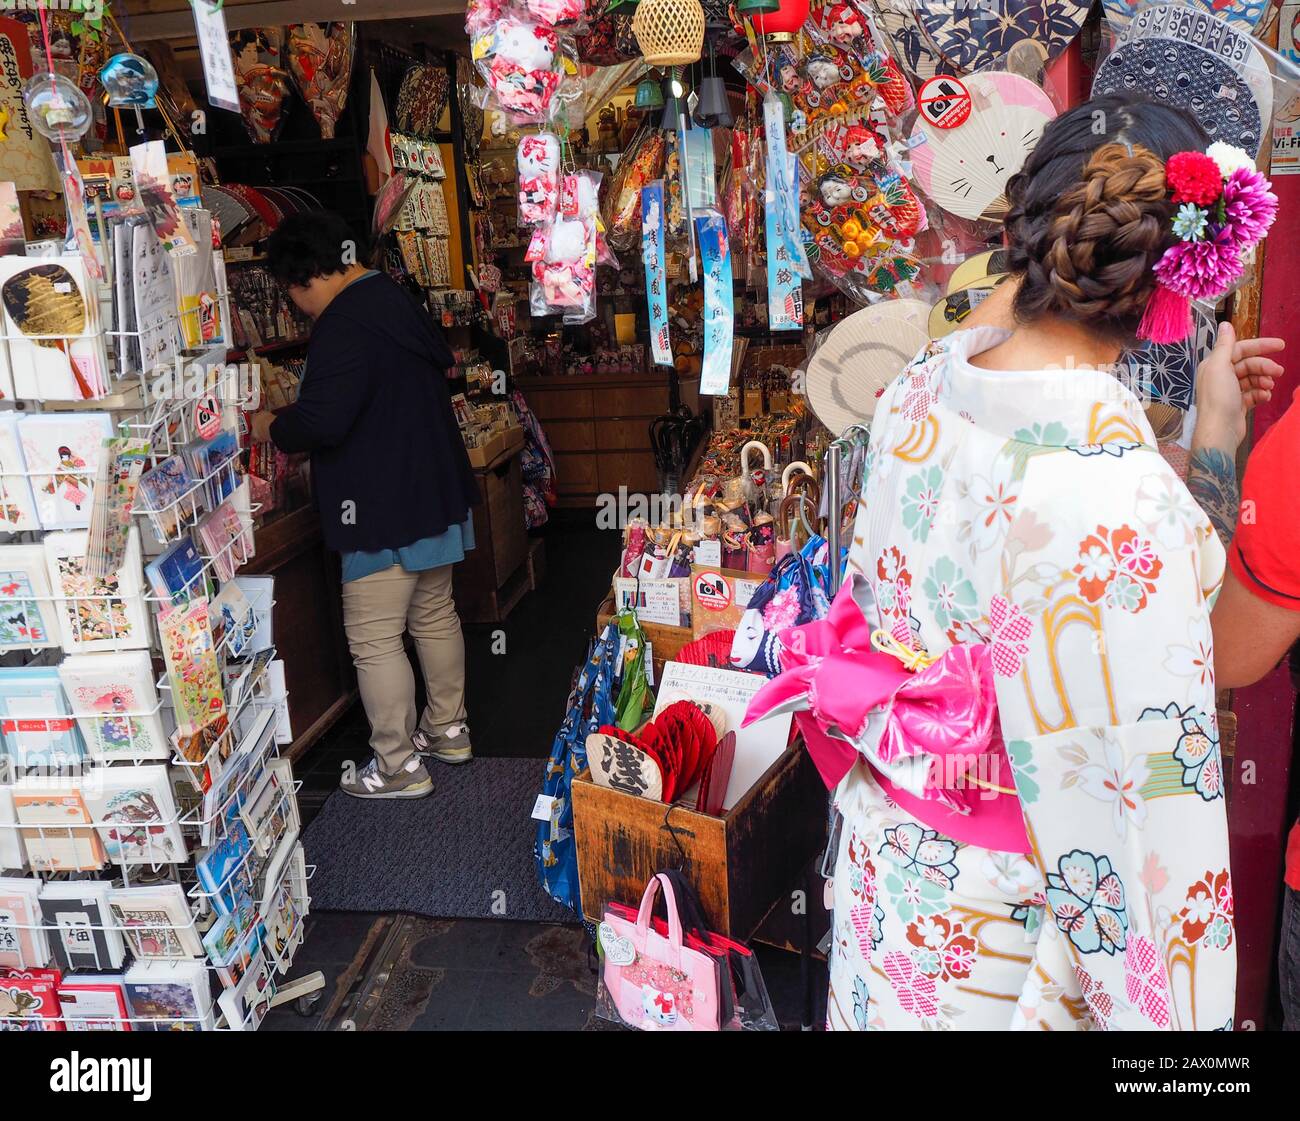 Tokyo, Japan - 10 Oct 2018:  Tourists are shopping at a crowded souvenir booth at Tokyo's Asakusa temple district. Stock Photo